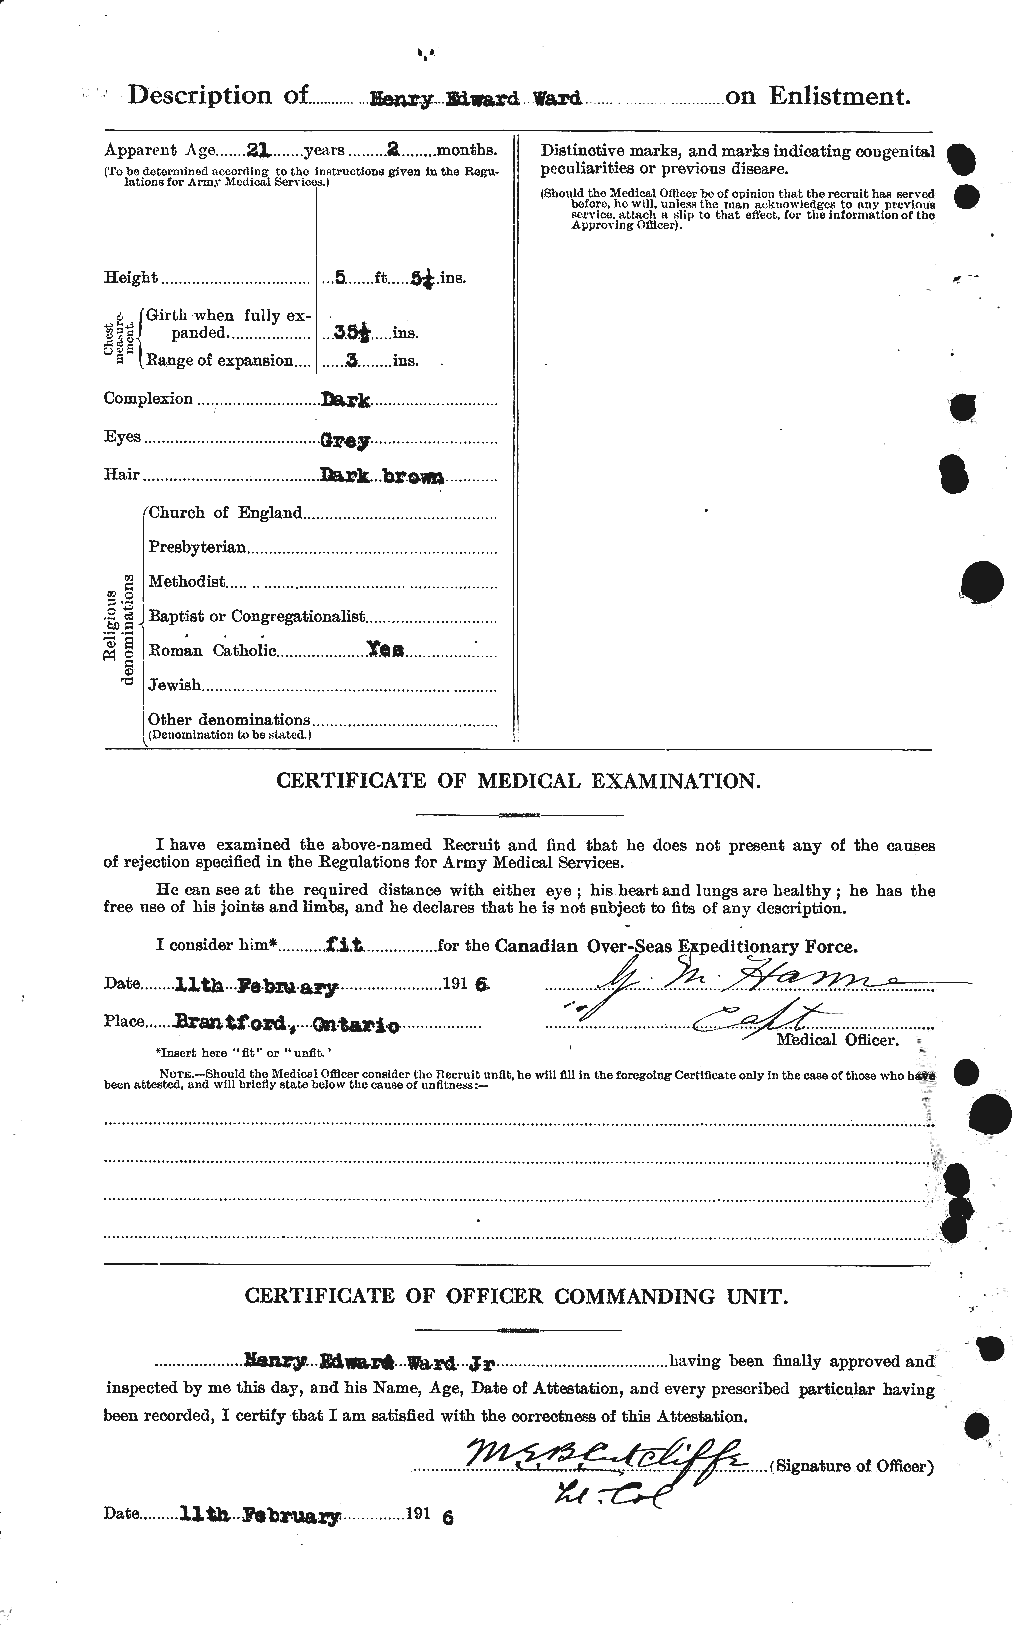 Personnel Records of the First World War - CEF 657833b